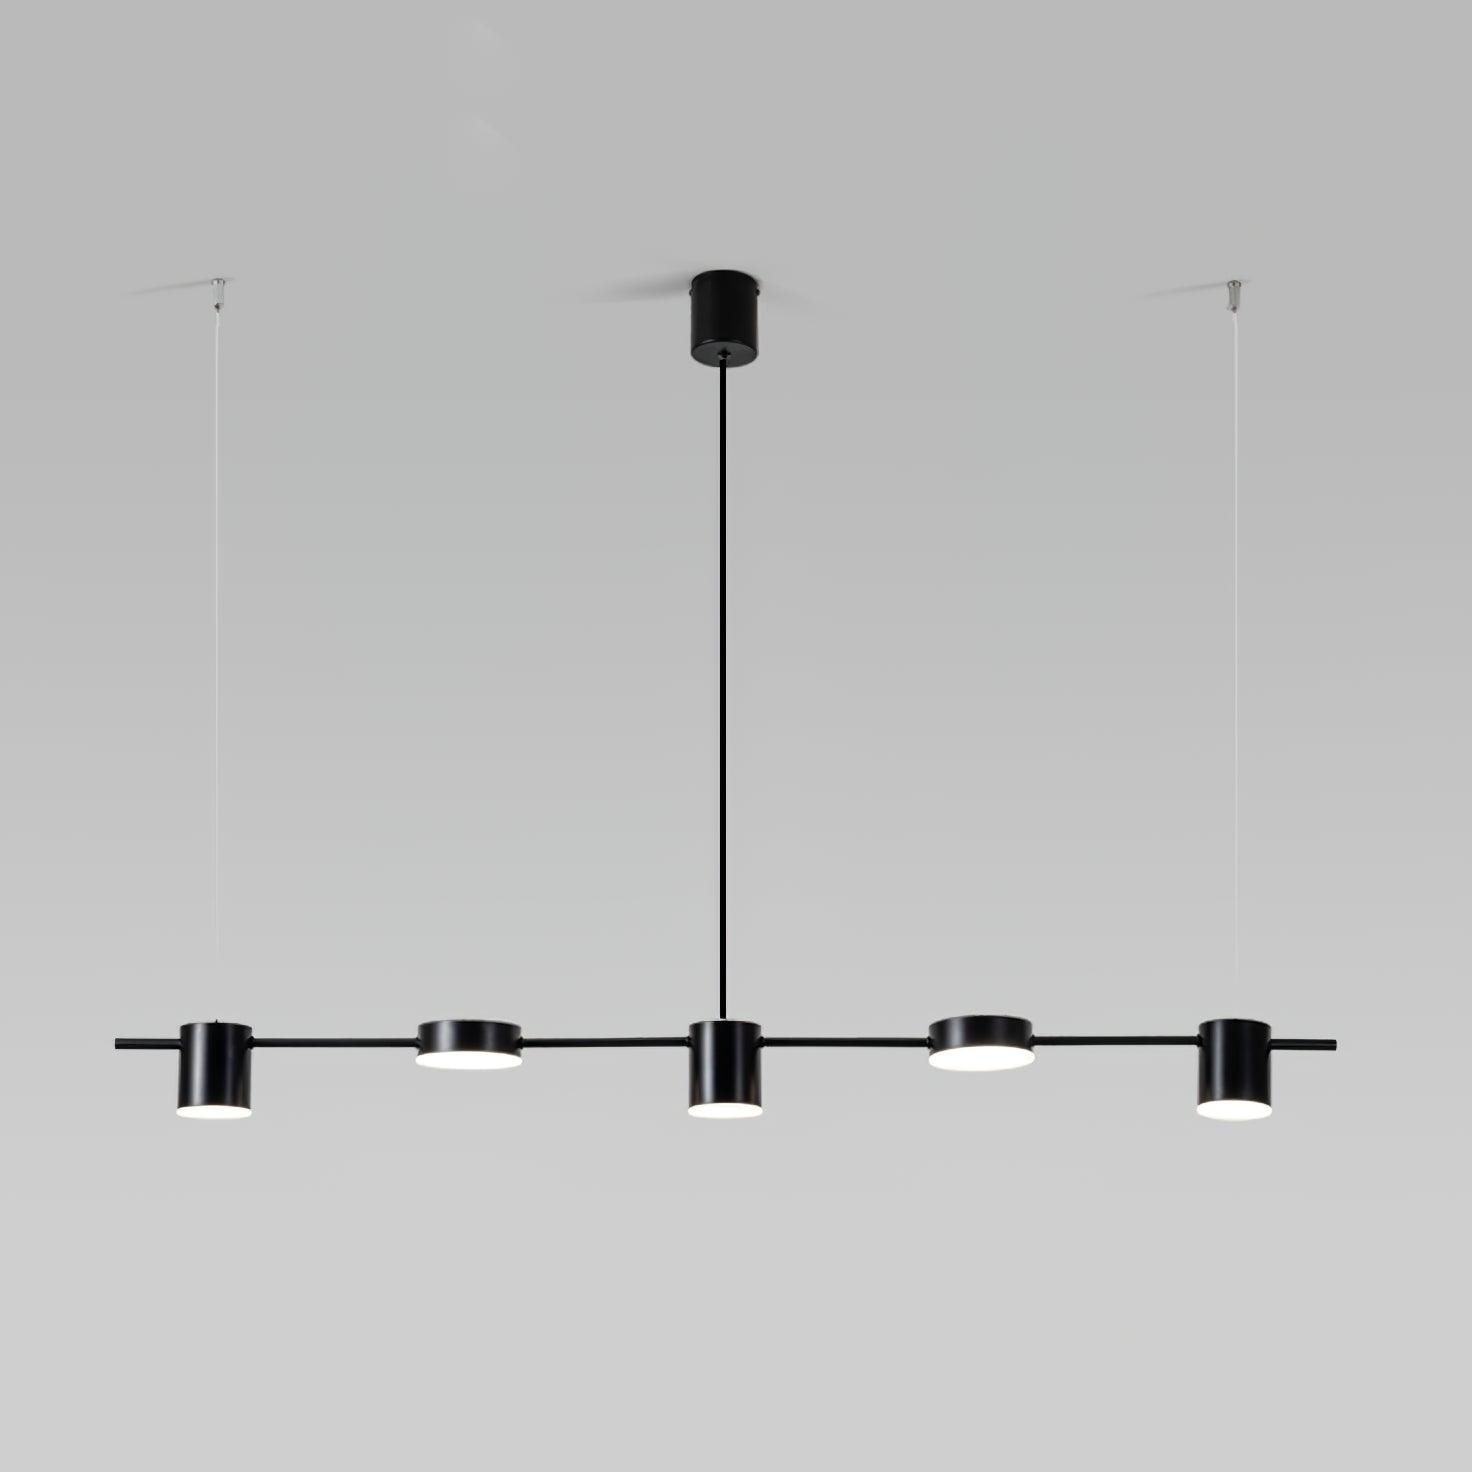 Black Linear Chandelier with Counterpoint LED Lights - 5 Heads, 47.2" x 59" (120cm x 150cm), emitting Cool White Light.